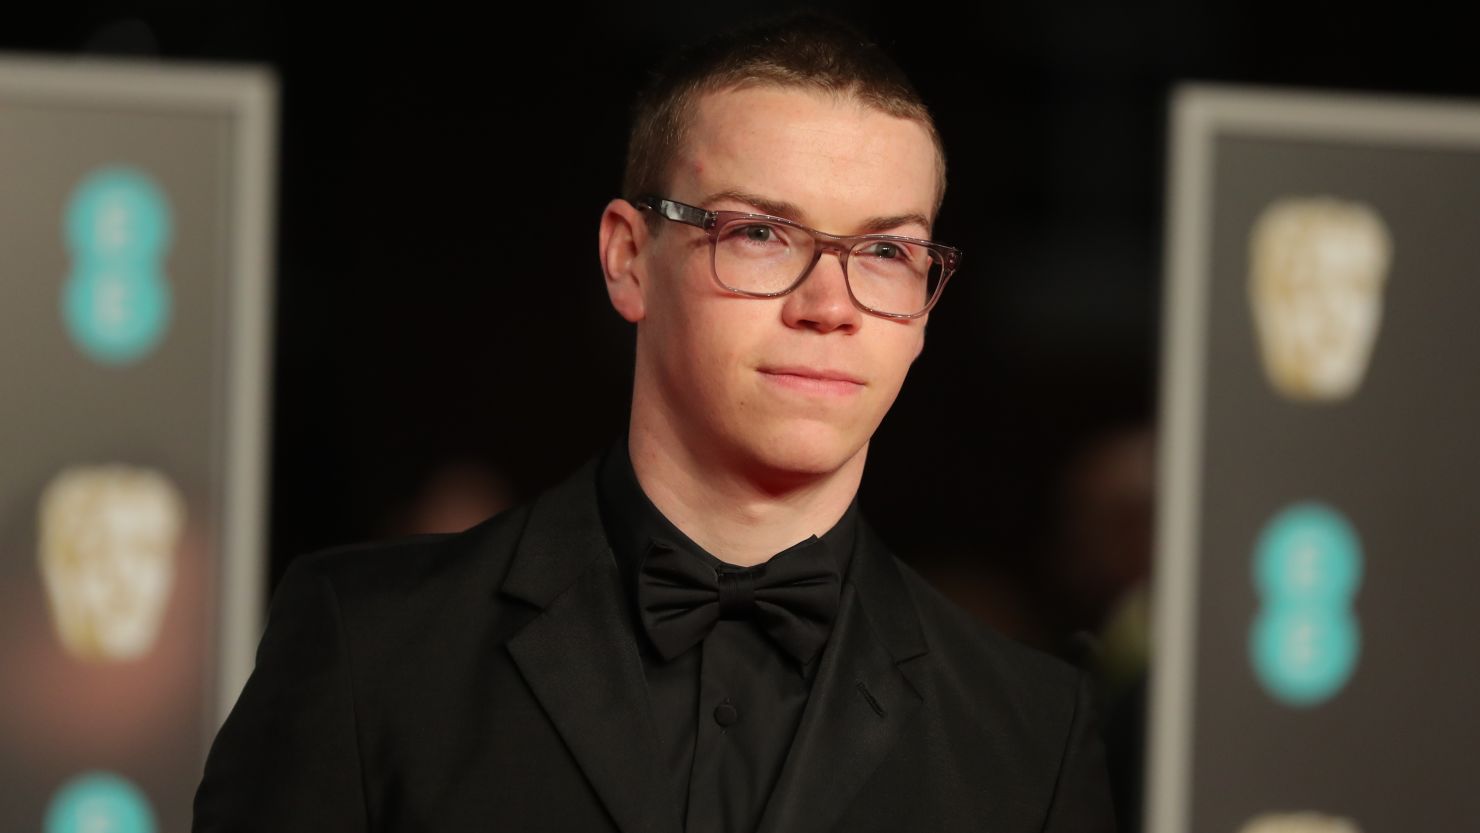 British actor Will Poulter poses on the red carpet upon arrival at the BAFTA British Academy Film Awards at the Royal Albert Hall in London on February 18, 2018.